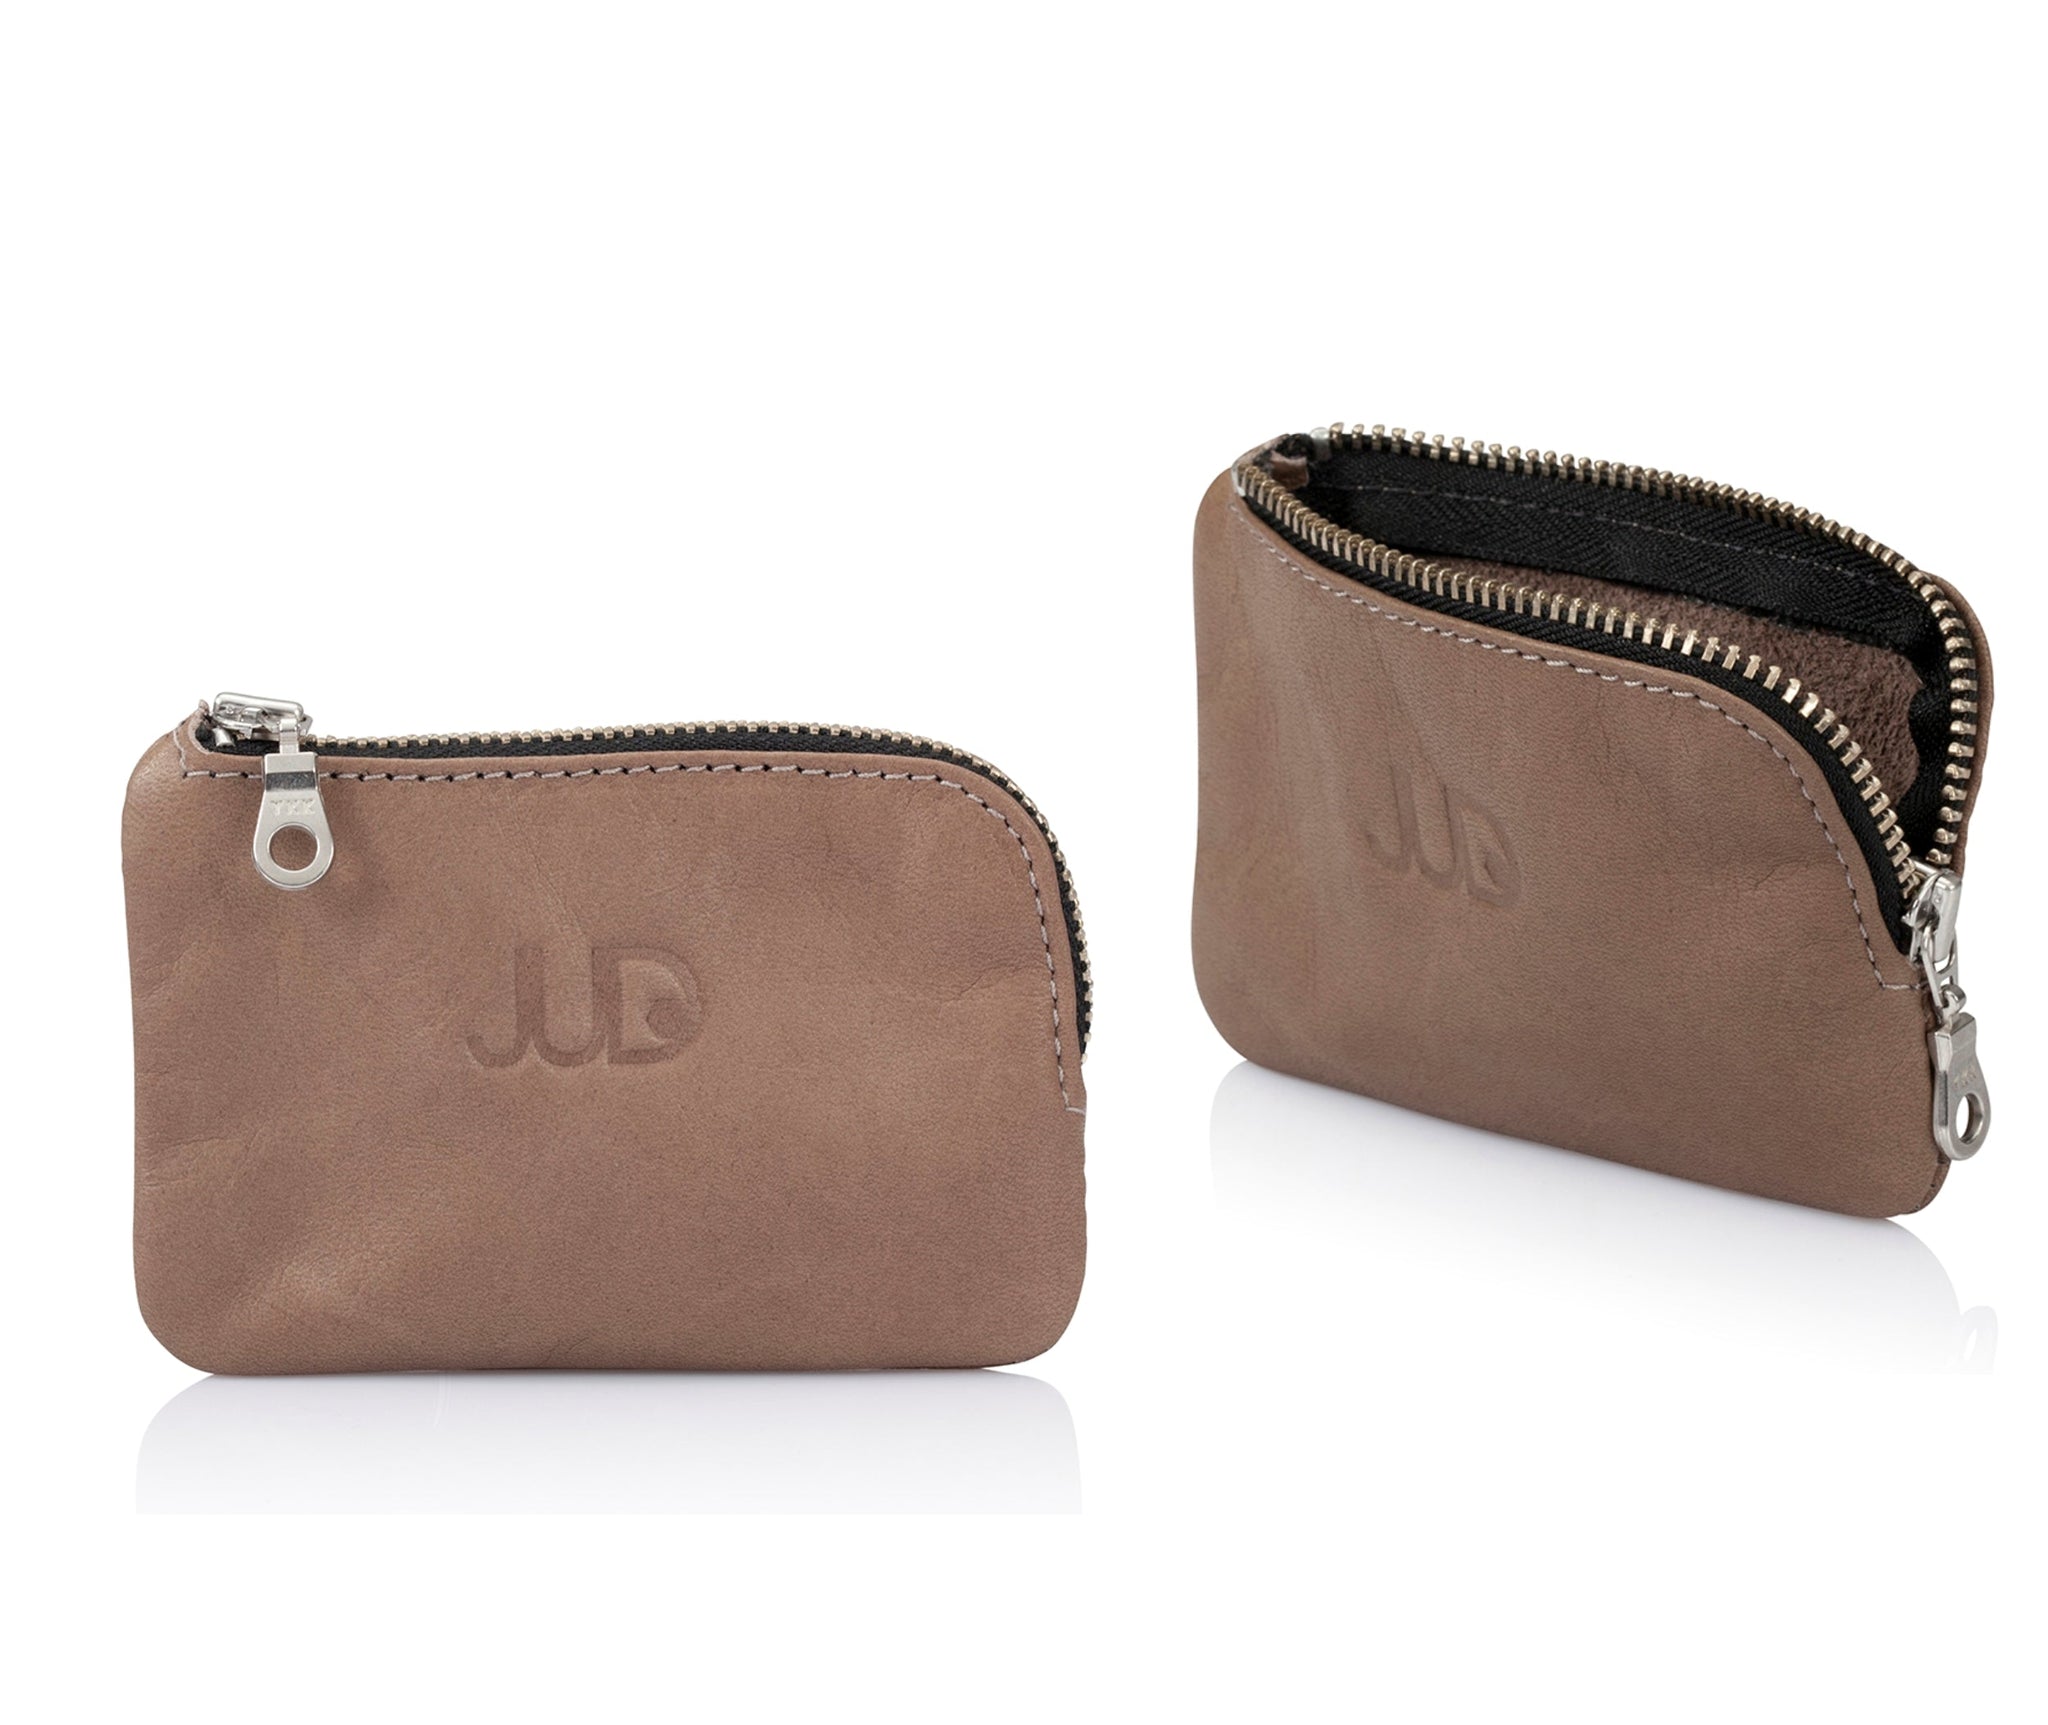 JUDtlv Large Ball Wallet Coin Pouch